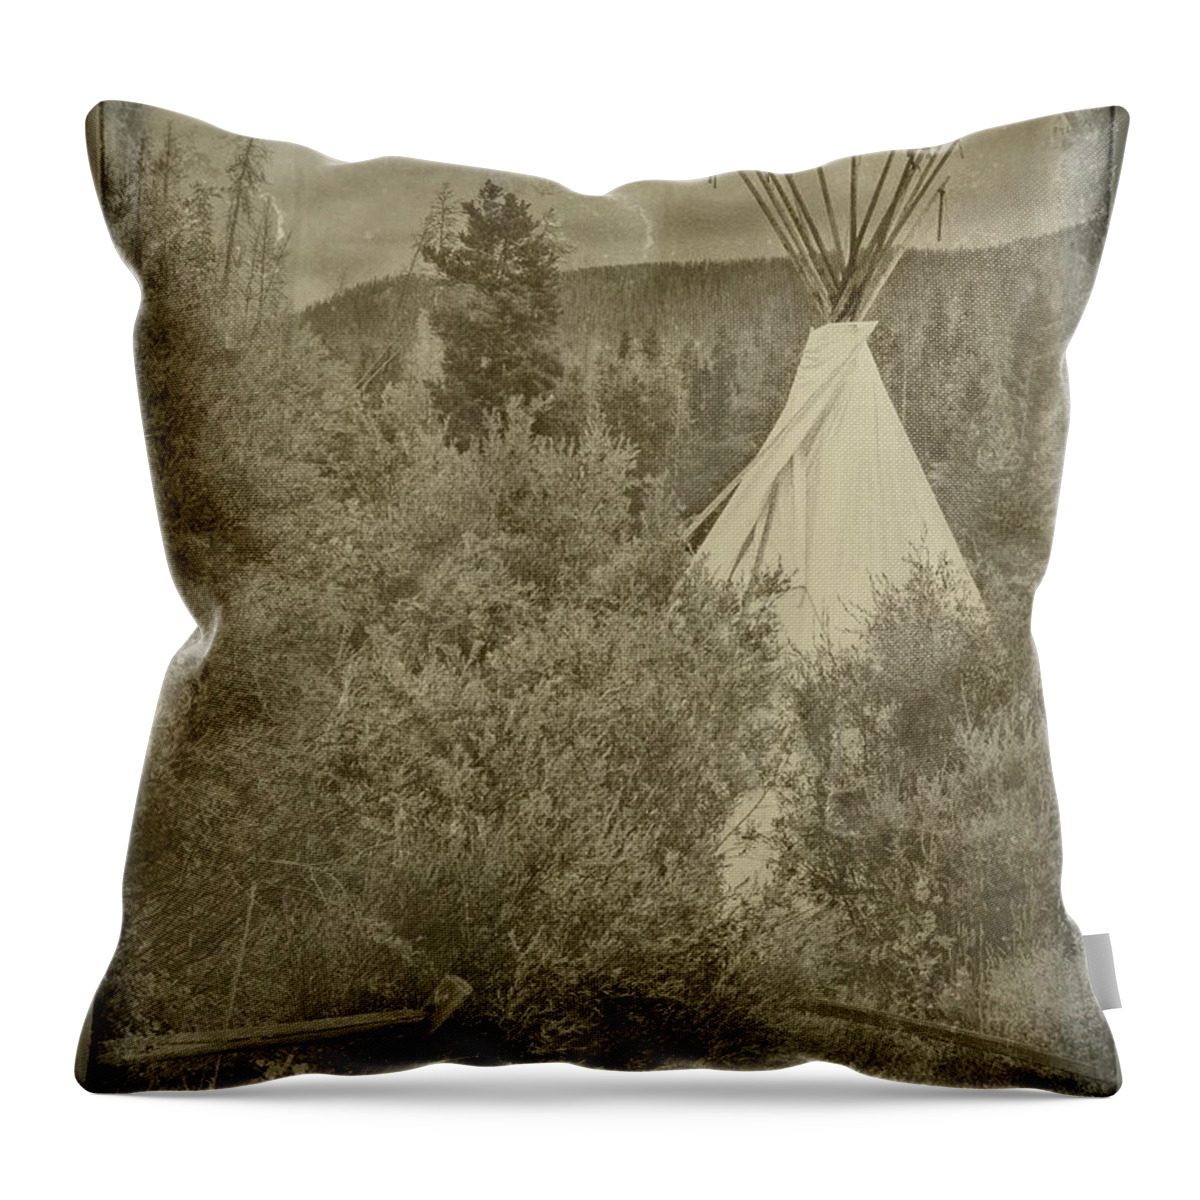 Tipi Throw Pillow featuring the photograph The Tipi by Vicki Stansbury